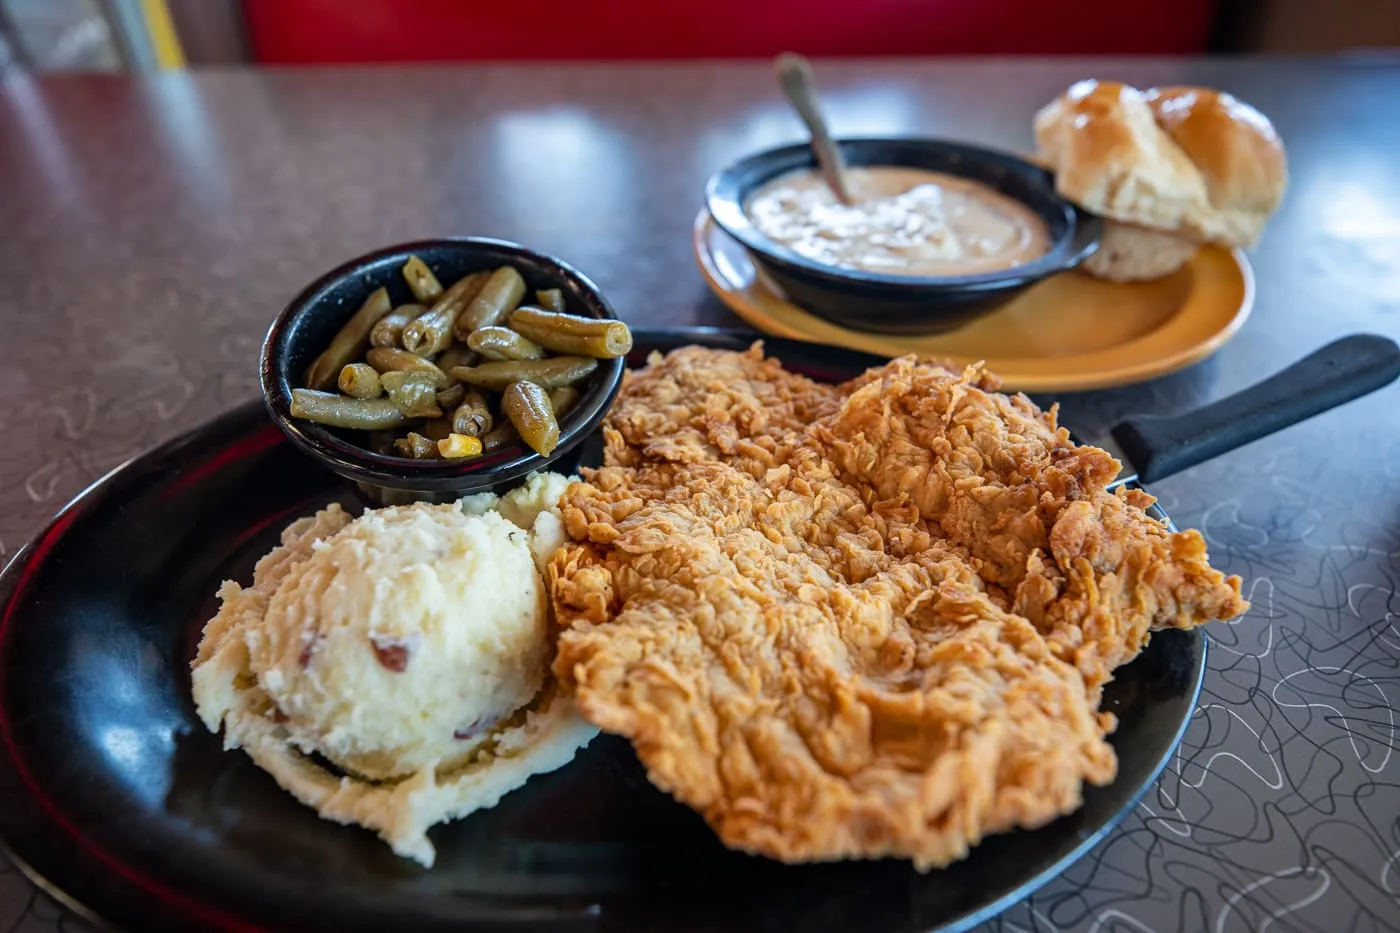 Chicken Fried Steak at Tally's Good Food Café in Tulsa, Oklahoma Route 66